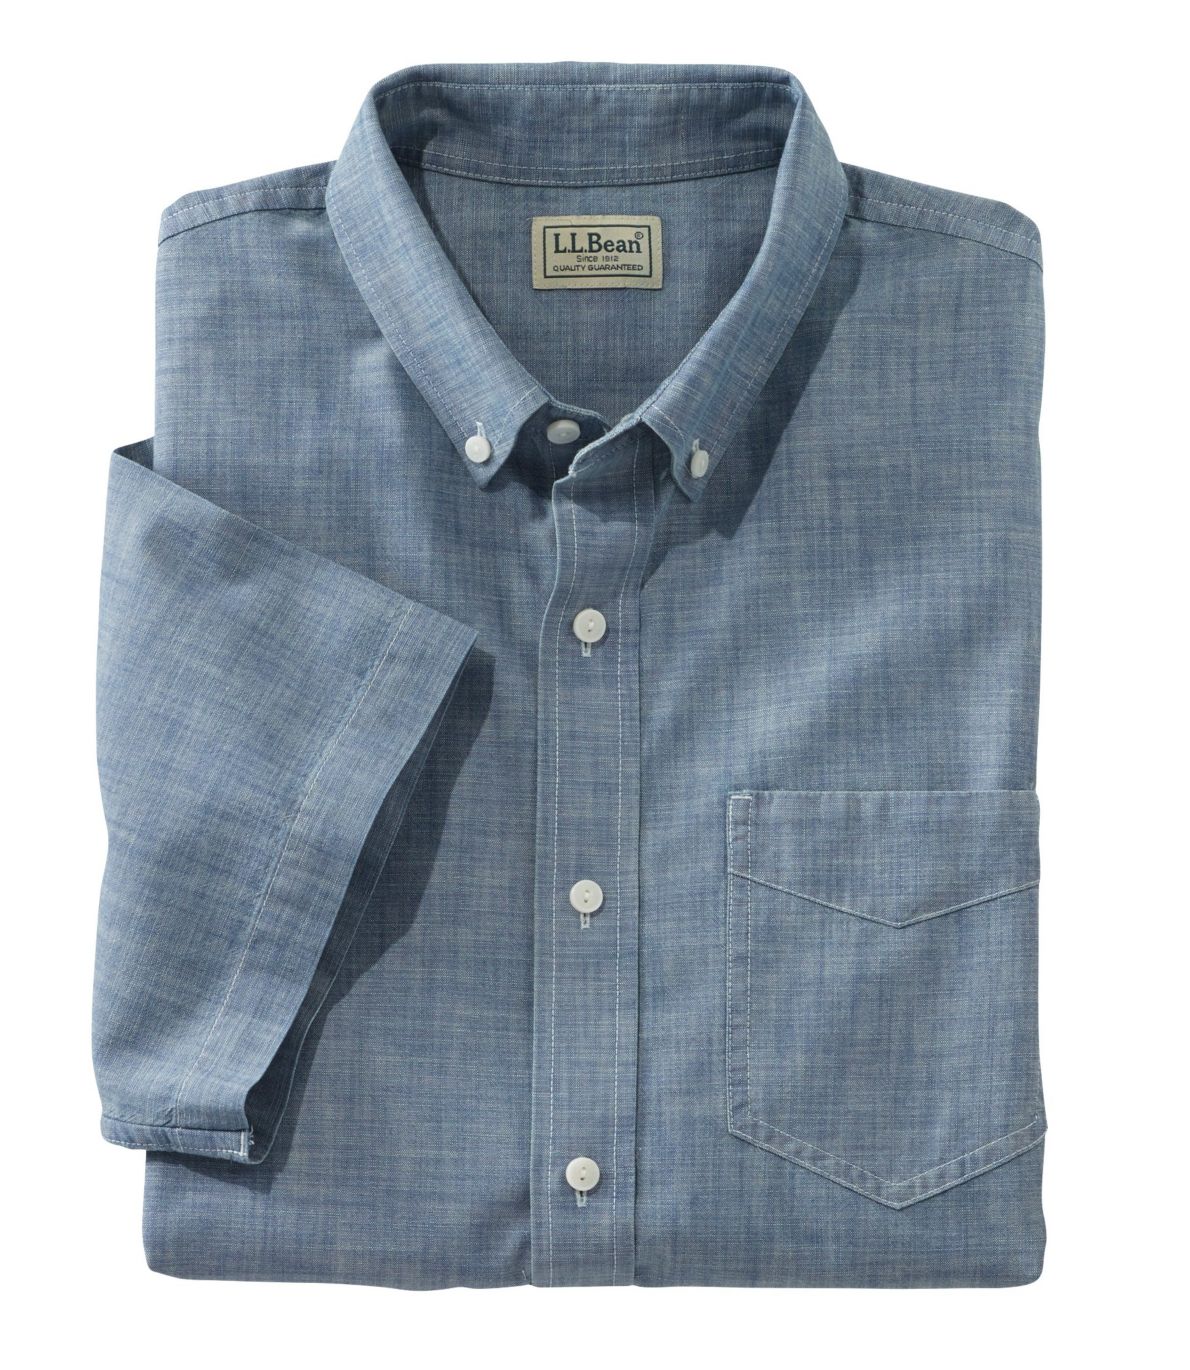 Men's Easy-Care Chambray Shirt, Traditional Fit Short-Sleeve